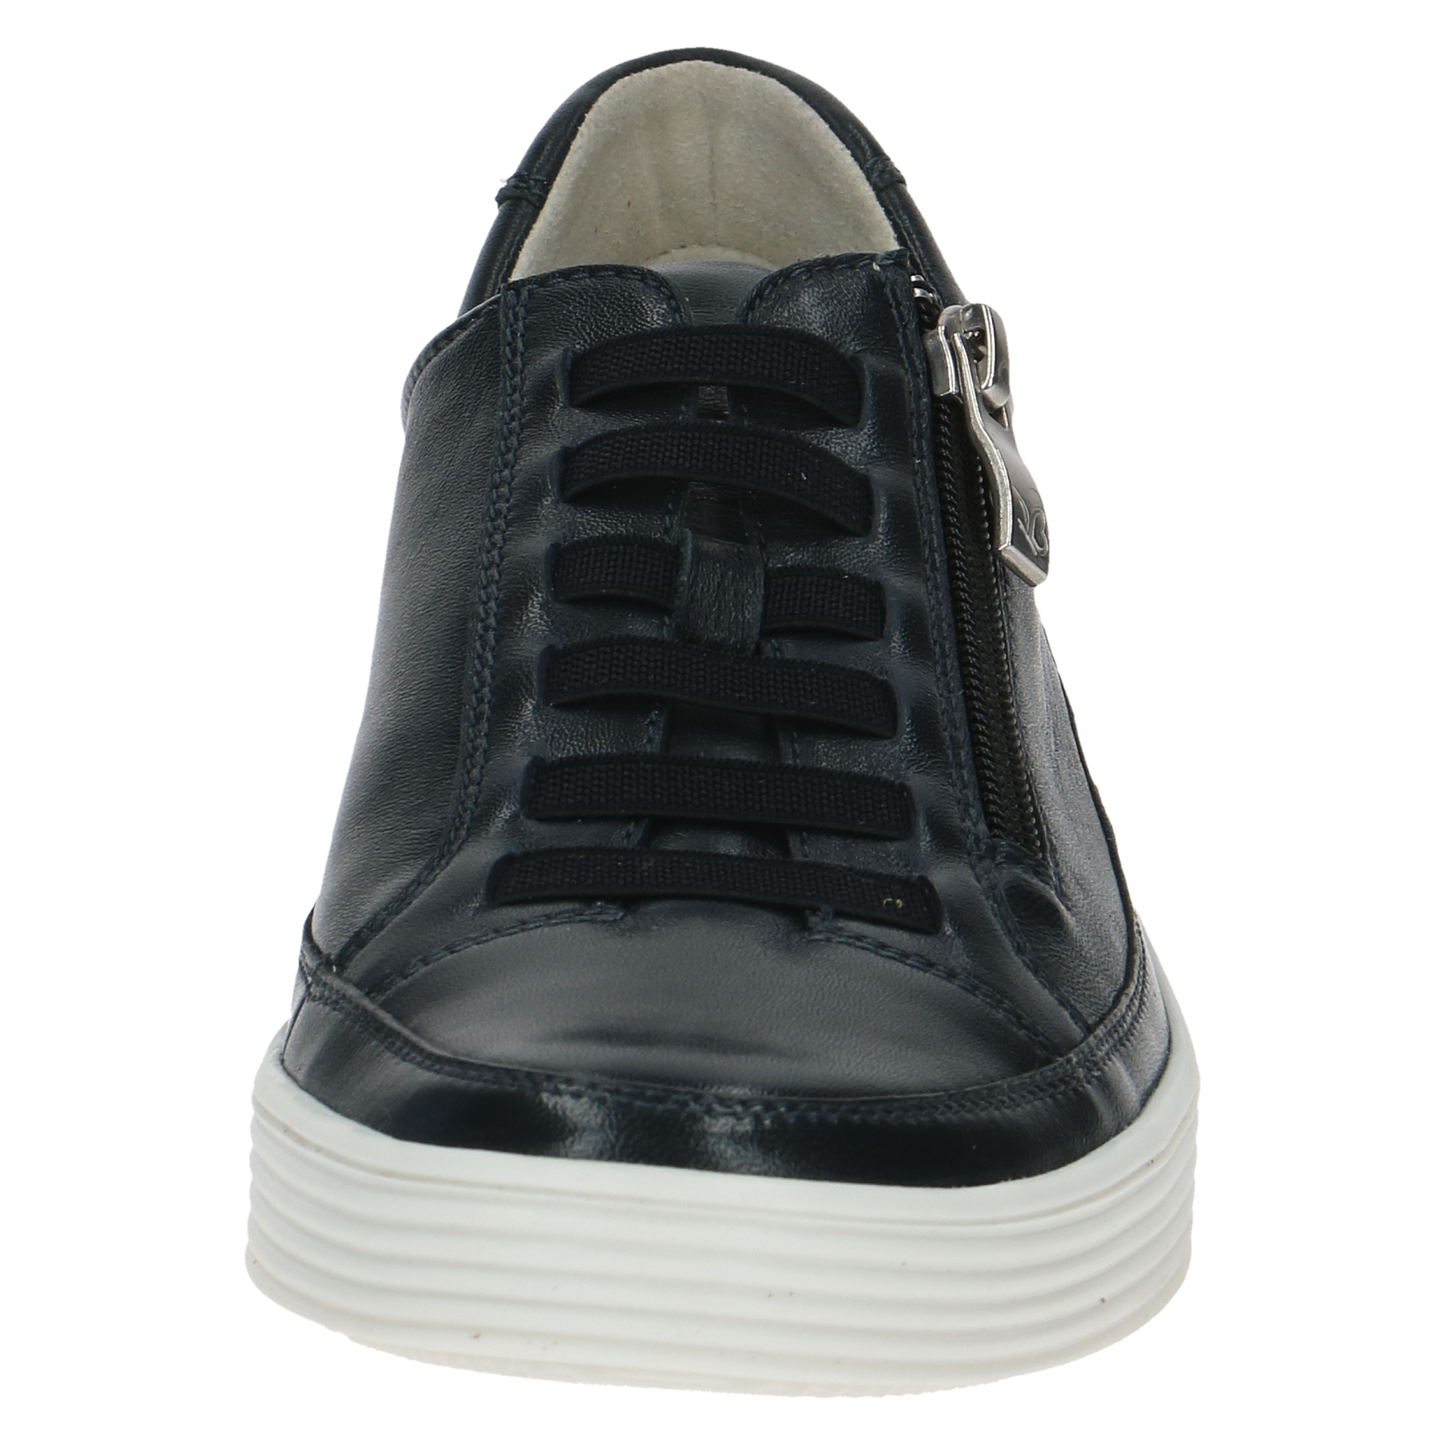 Navy Soft Nappa Leather Trainer Slip on Caprice 23755-20